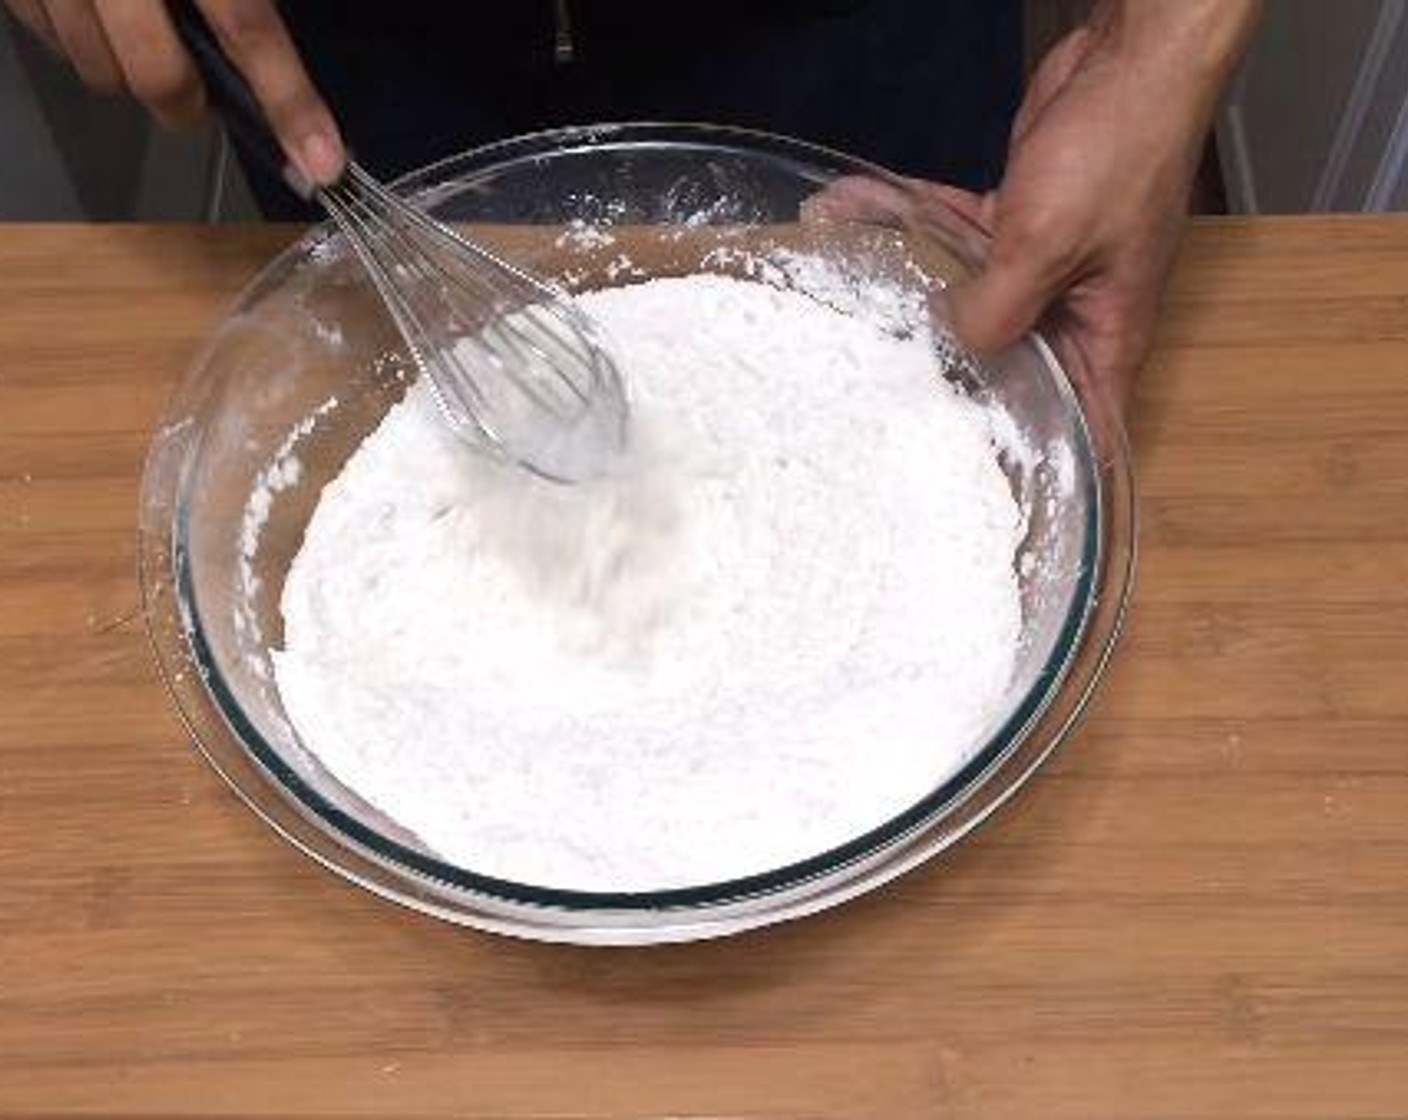 step 1 Preheat your oven to 350 degrees F (180 degrees C) . Line a 9-inch spring form pan or cake pan with parchment paper. In a bowl mix together the All-Purpose Flour (3 cups),Salt (1 tsp), Granulated Sugar (1 1/4 cups), Brown Sugar (1/2 cup), Baking Soda (1/2 tsp), Baking Powder (1/2 Tbsp).